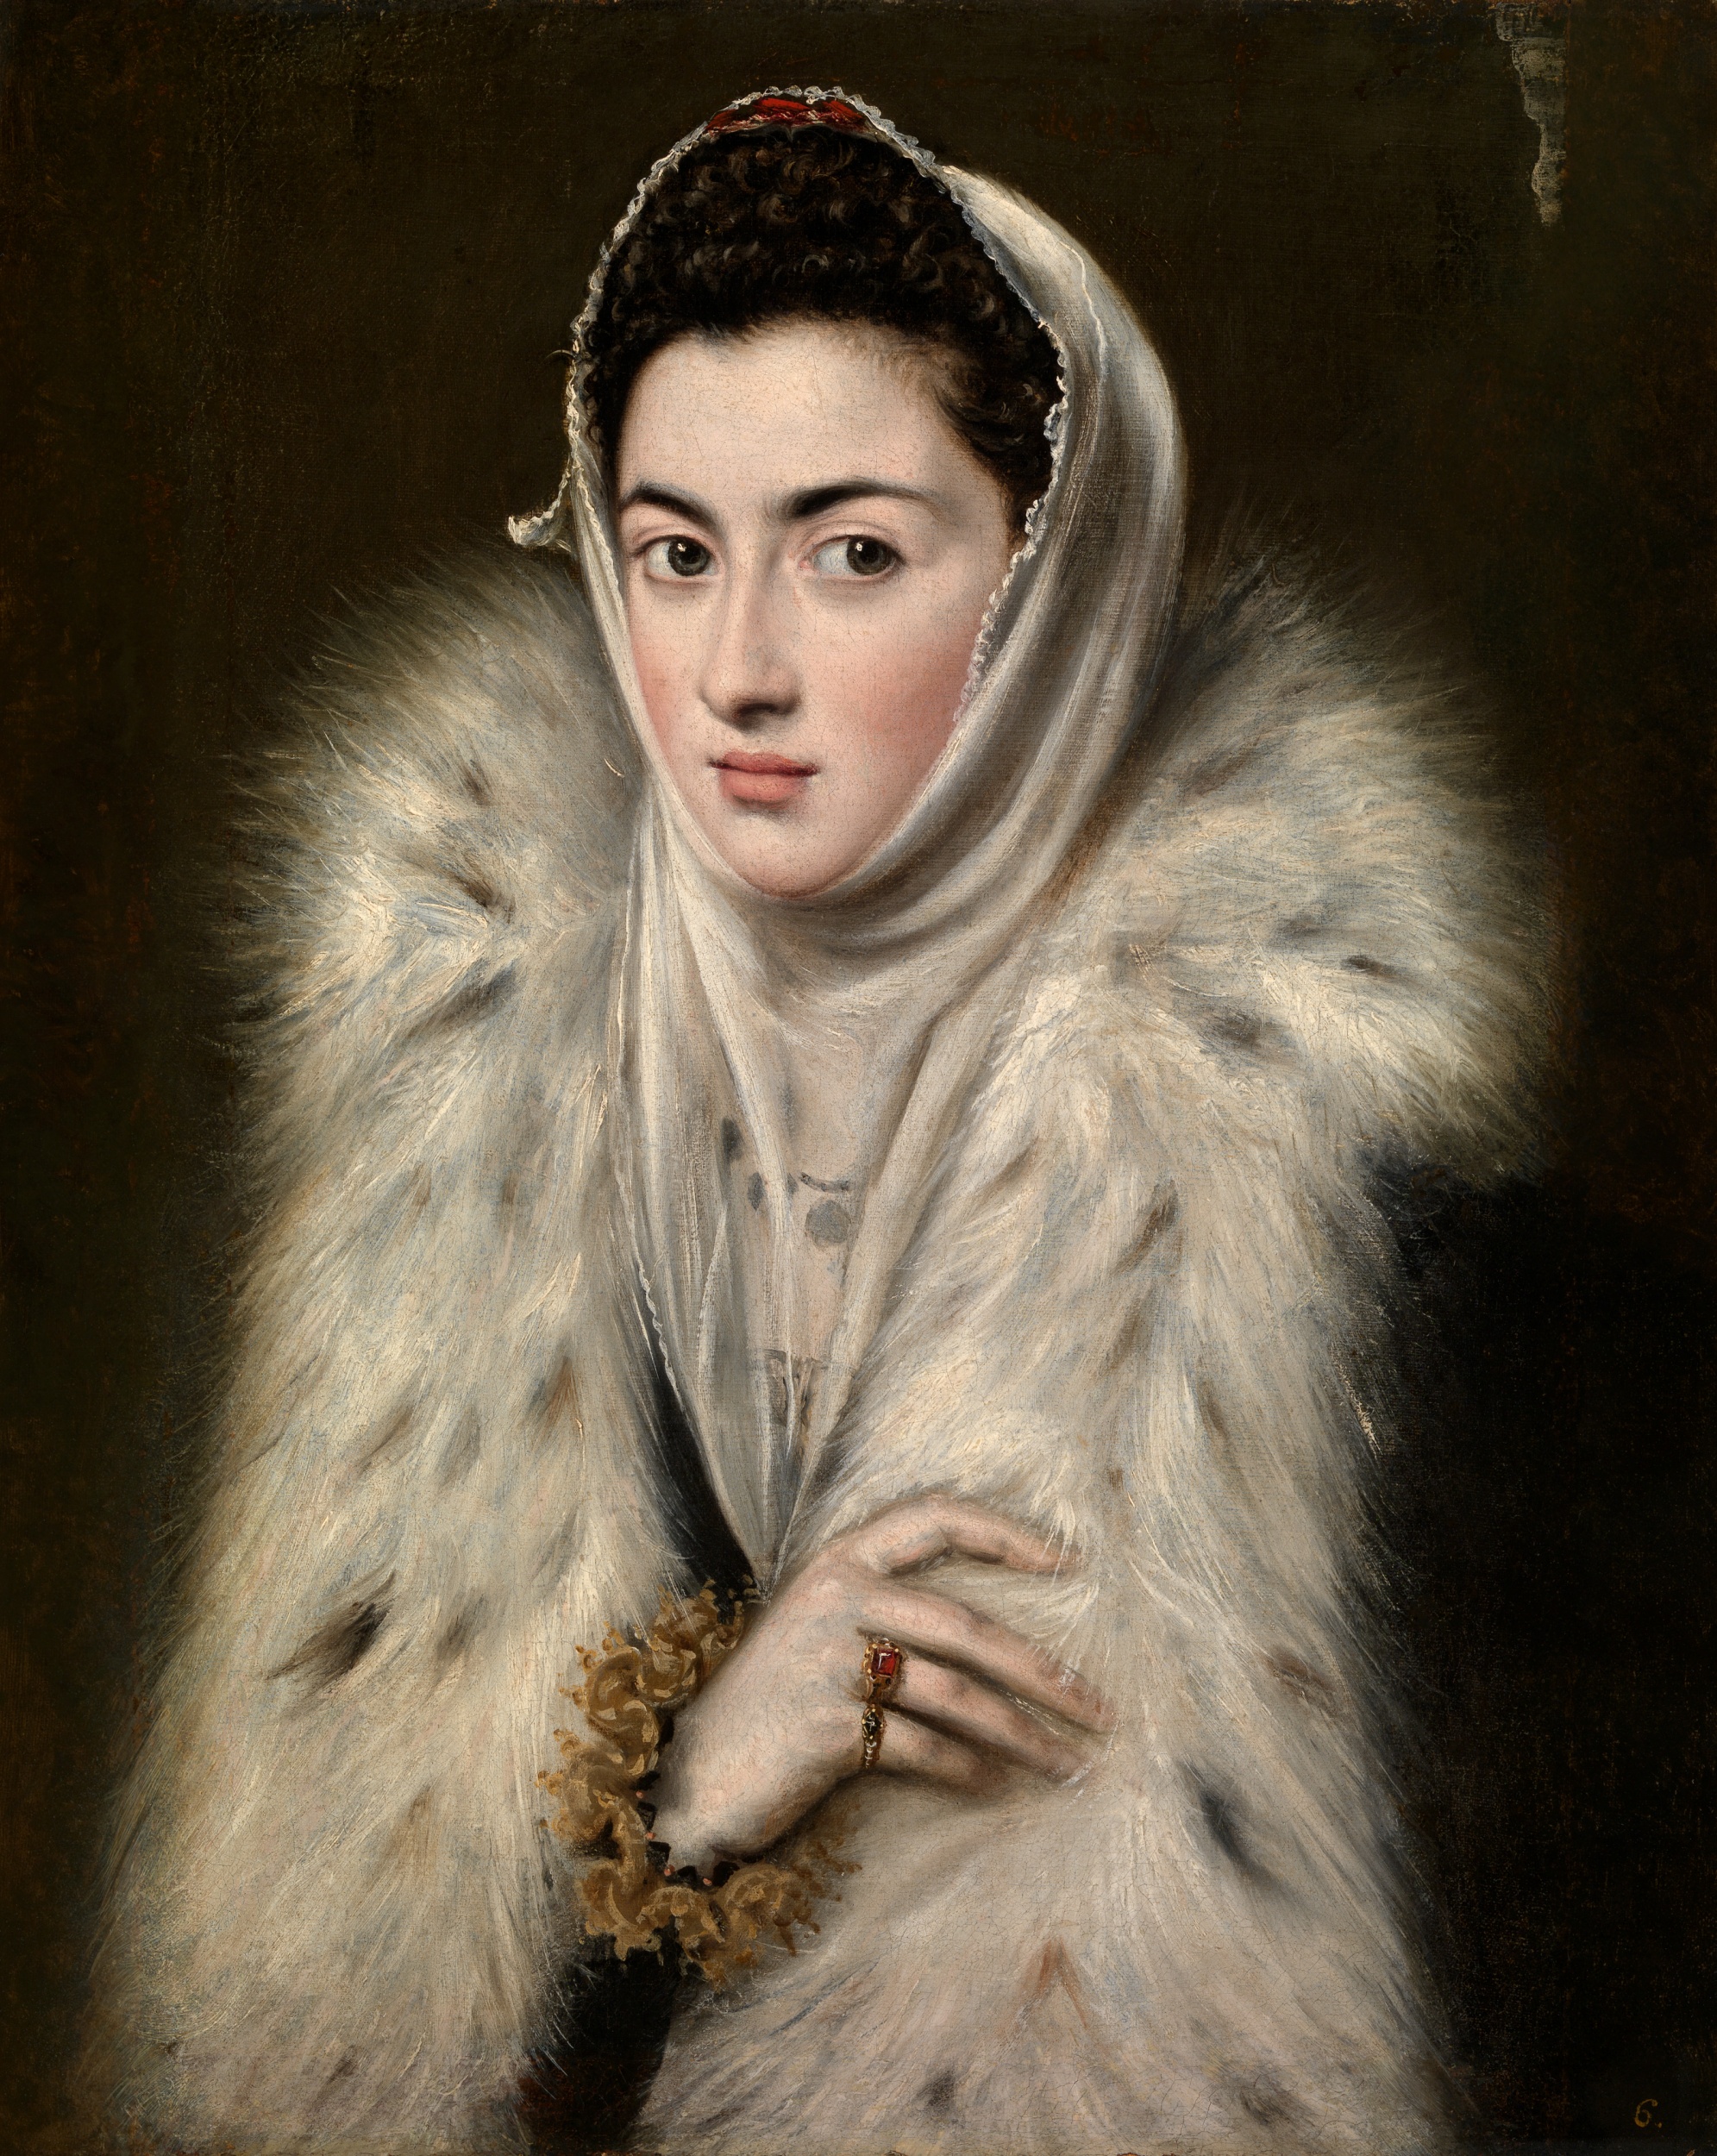 *Alonso Sánchez Coello, zugeschrieben / attributed to, Lady in a Fur Wrap, c. 1577-79, Glasgow Life (Glasgow Museums) on behalf of Glasgow City Council, the Stirling Maxwell Collection*